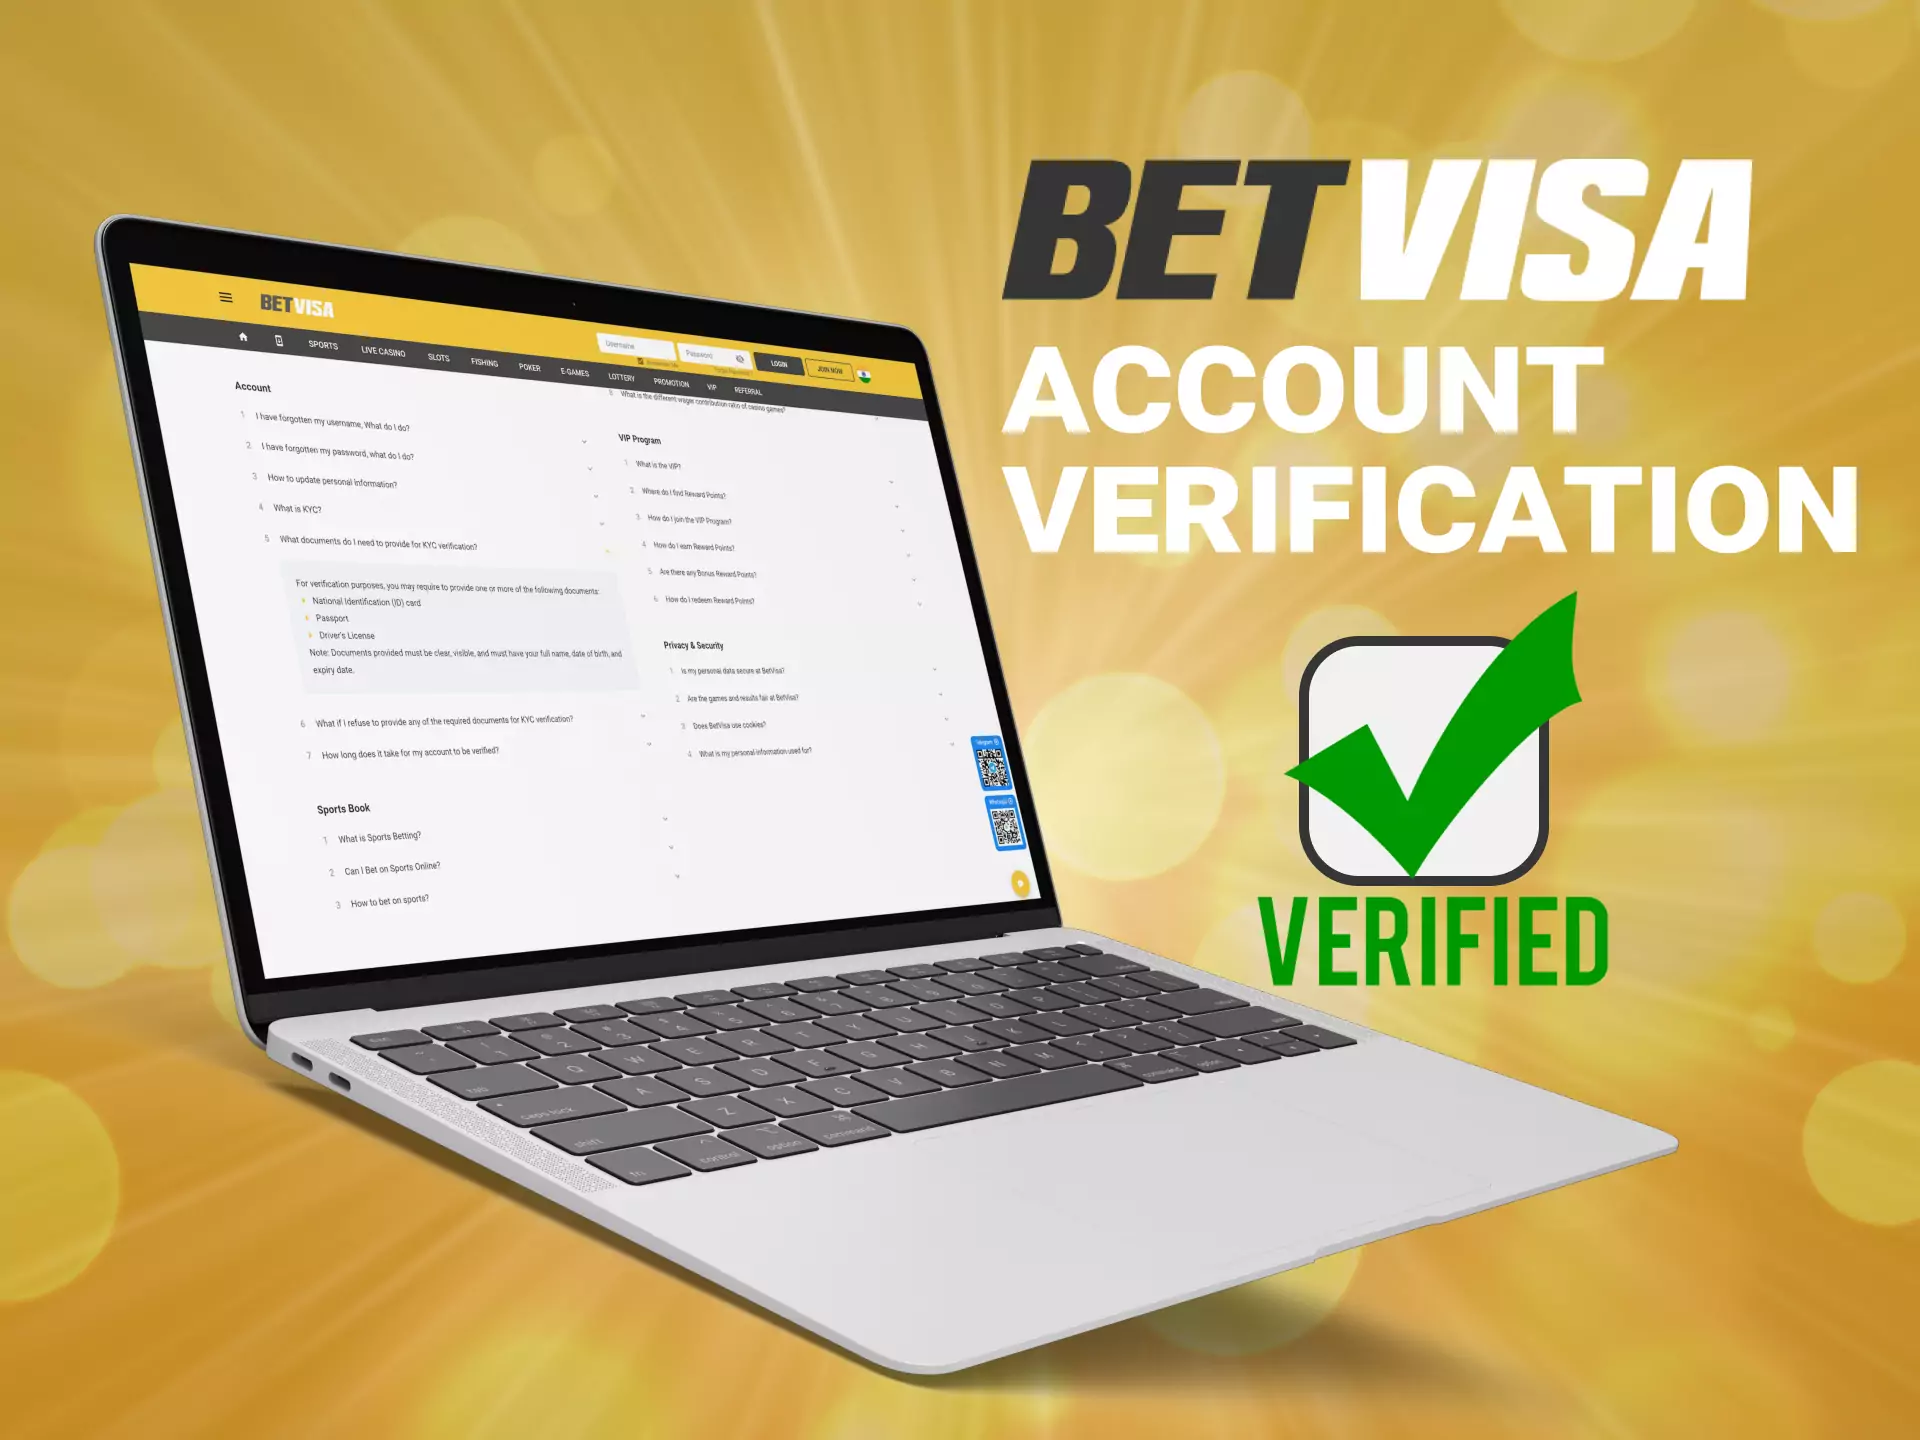 To start playing or betting on Betvisa, verify your account.